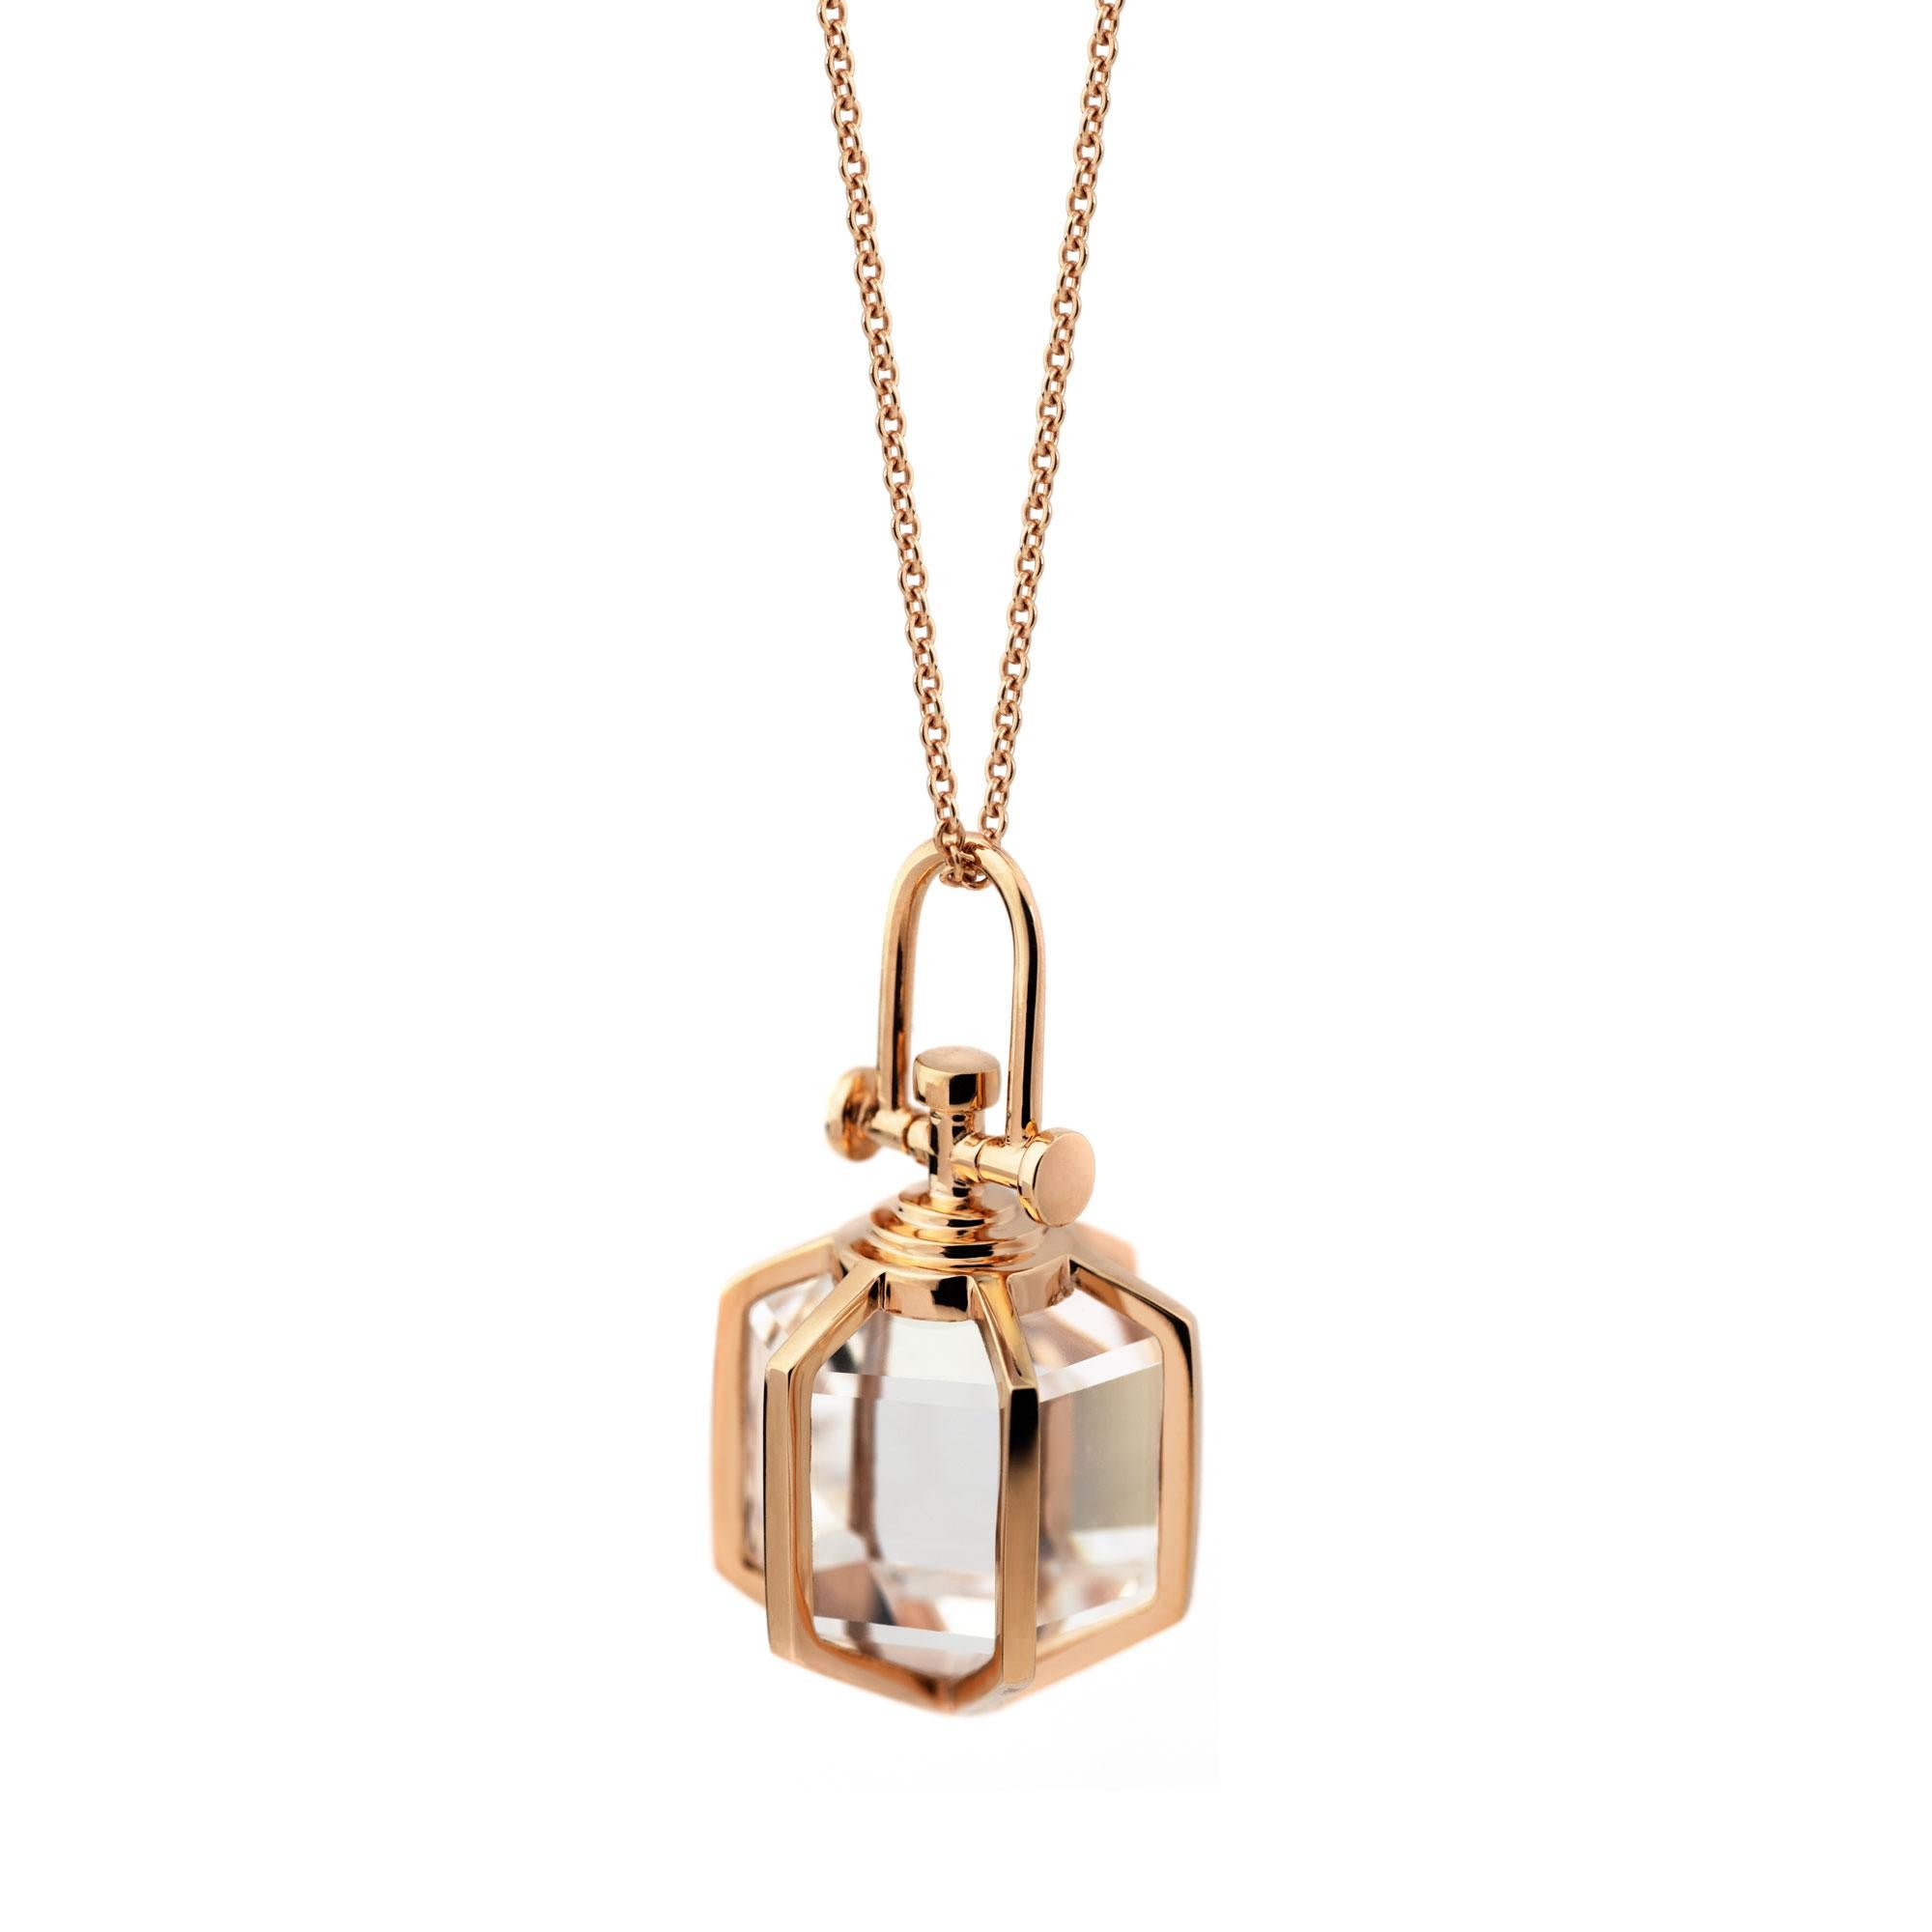 Rebecca Li designs Mindfulness. 
This necklace is from her Six Senses Talisman Collection. It's inspired by sacred geometry, and the designer wants us to always remember that we have the ability to control uncontrollable by simply control what we